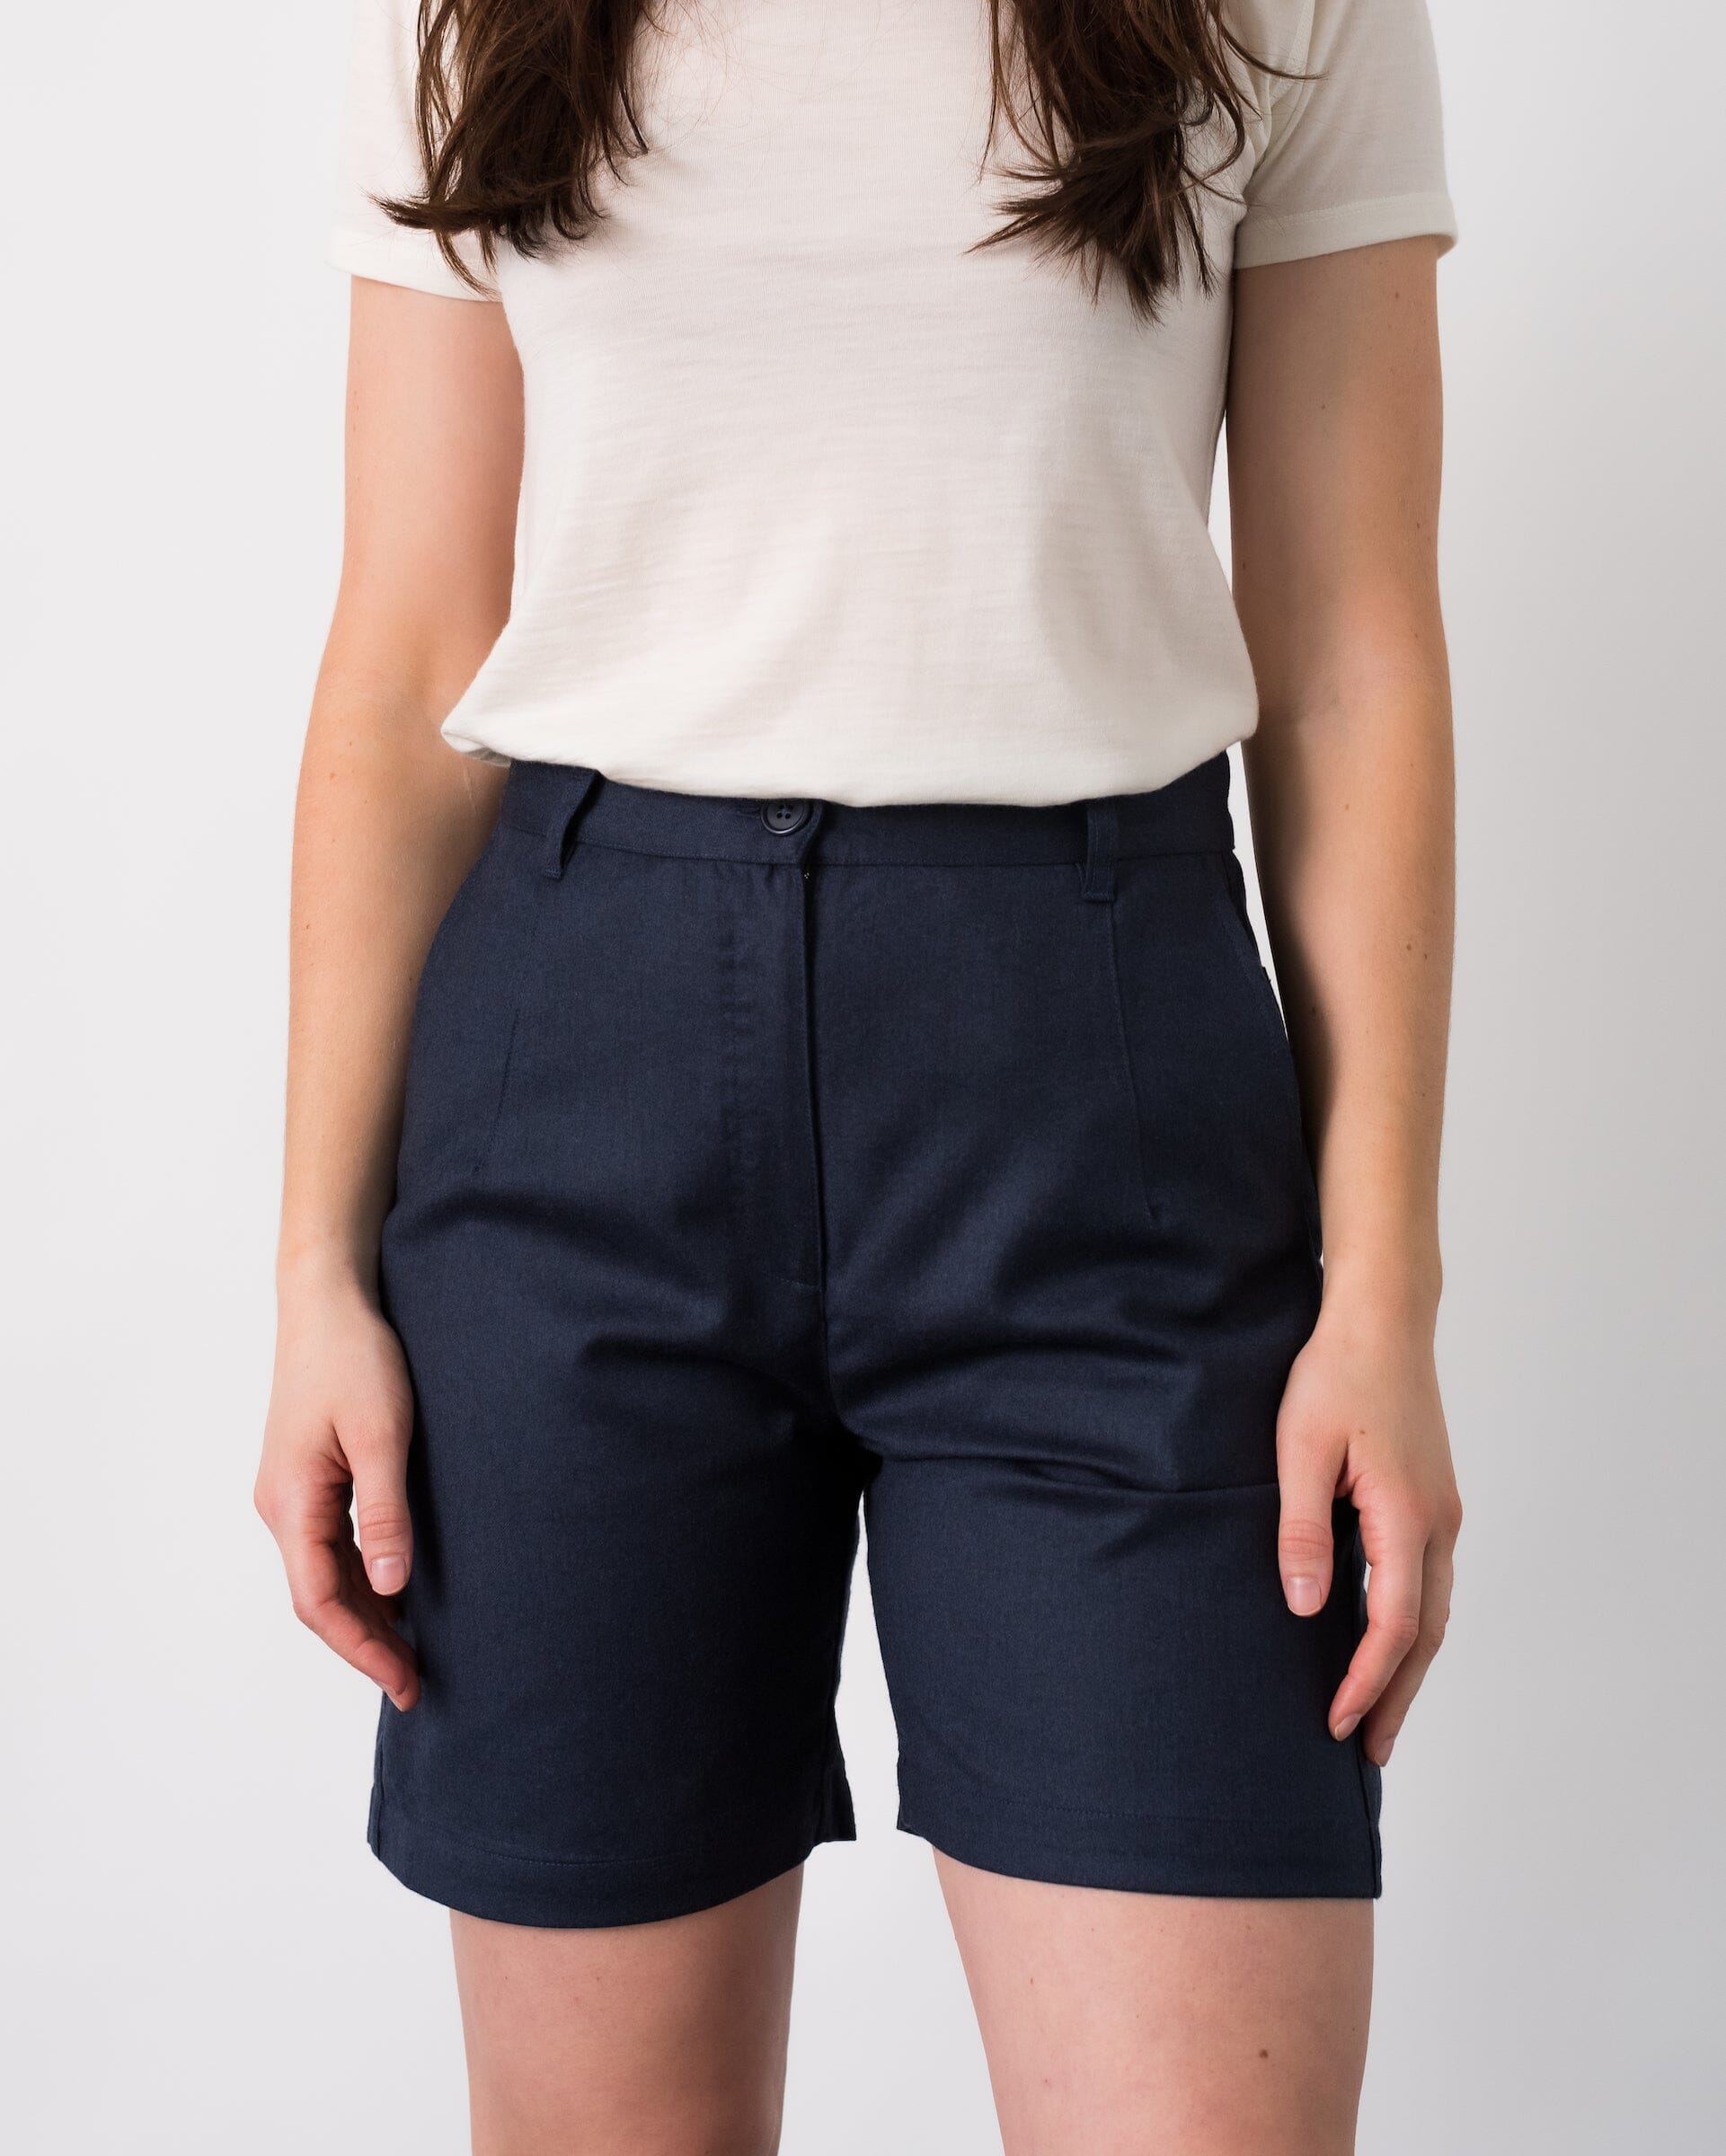 The Womens Light Wool Short in Heather Navy - Full Body 1 #color_heather navy